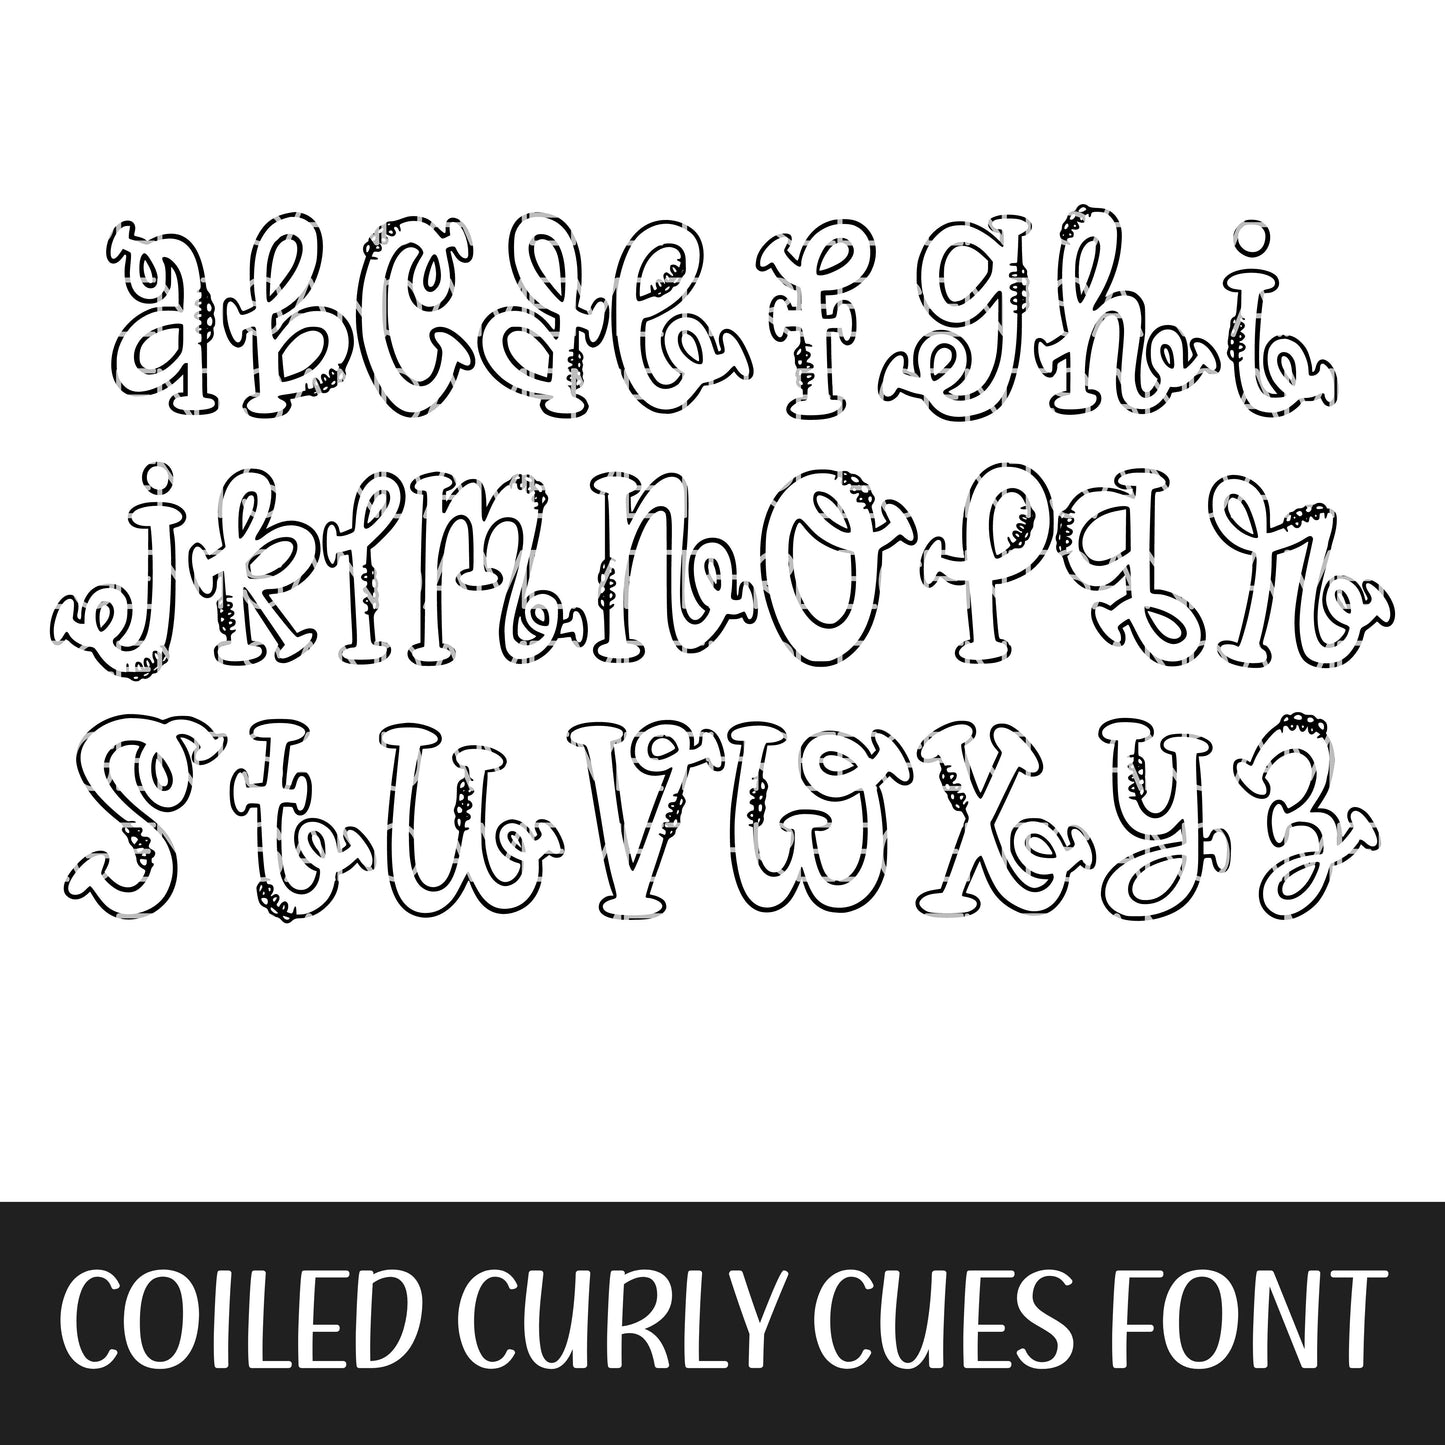 CURLY CUES FONT